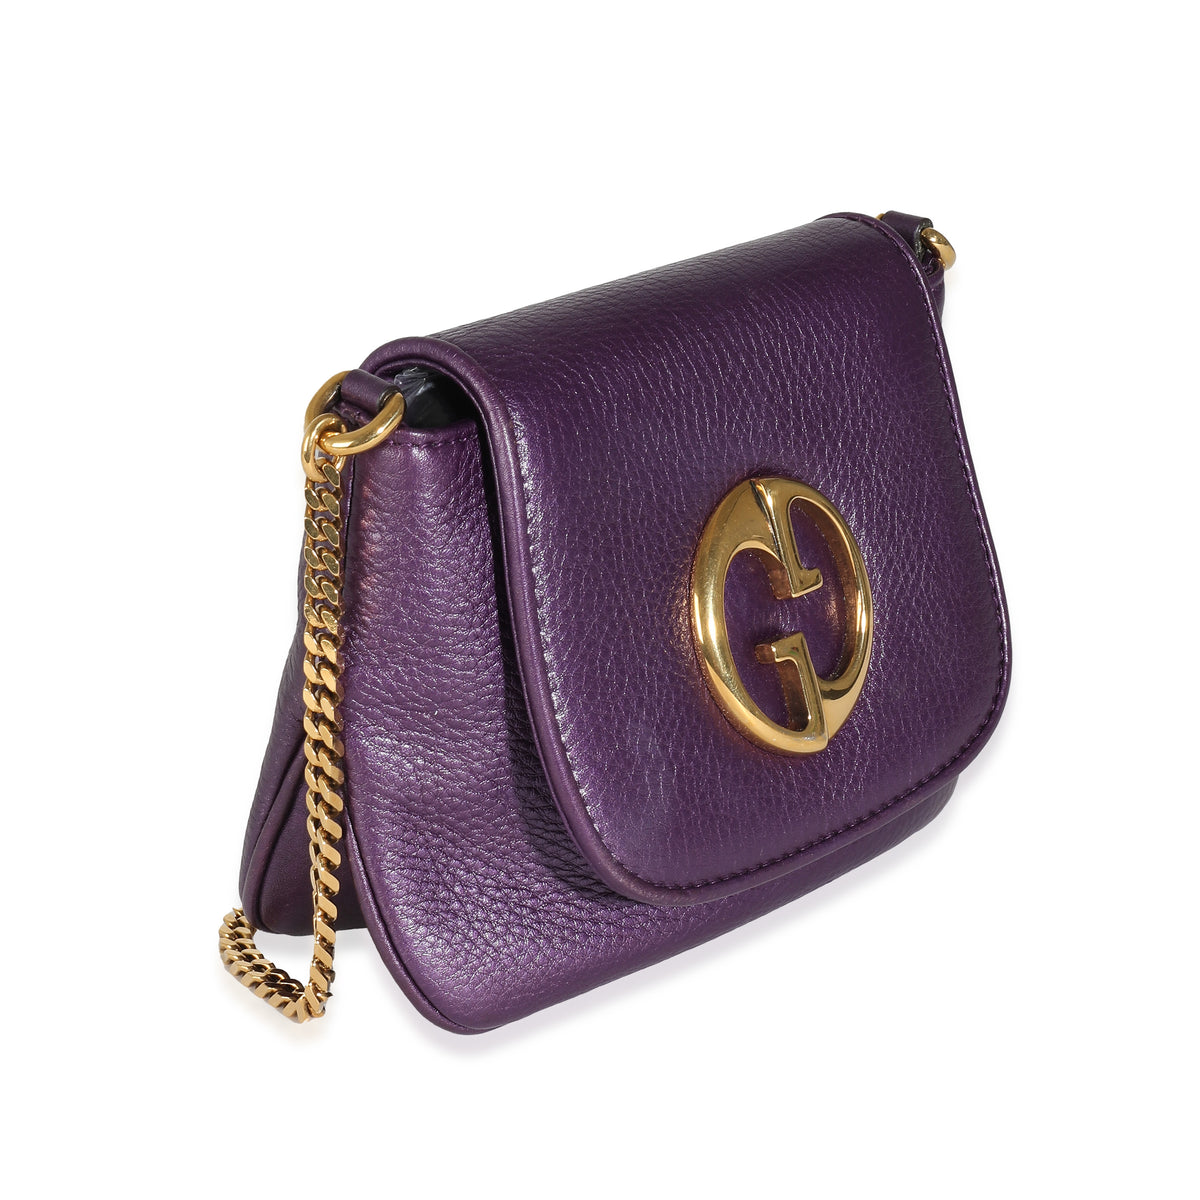 Gucci Metallic Purple Pebbled Leather Small 1973 Chain Shoulder Bag